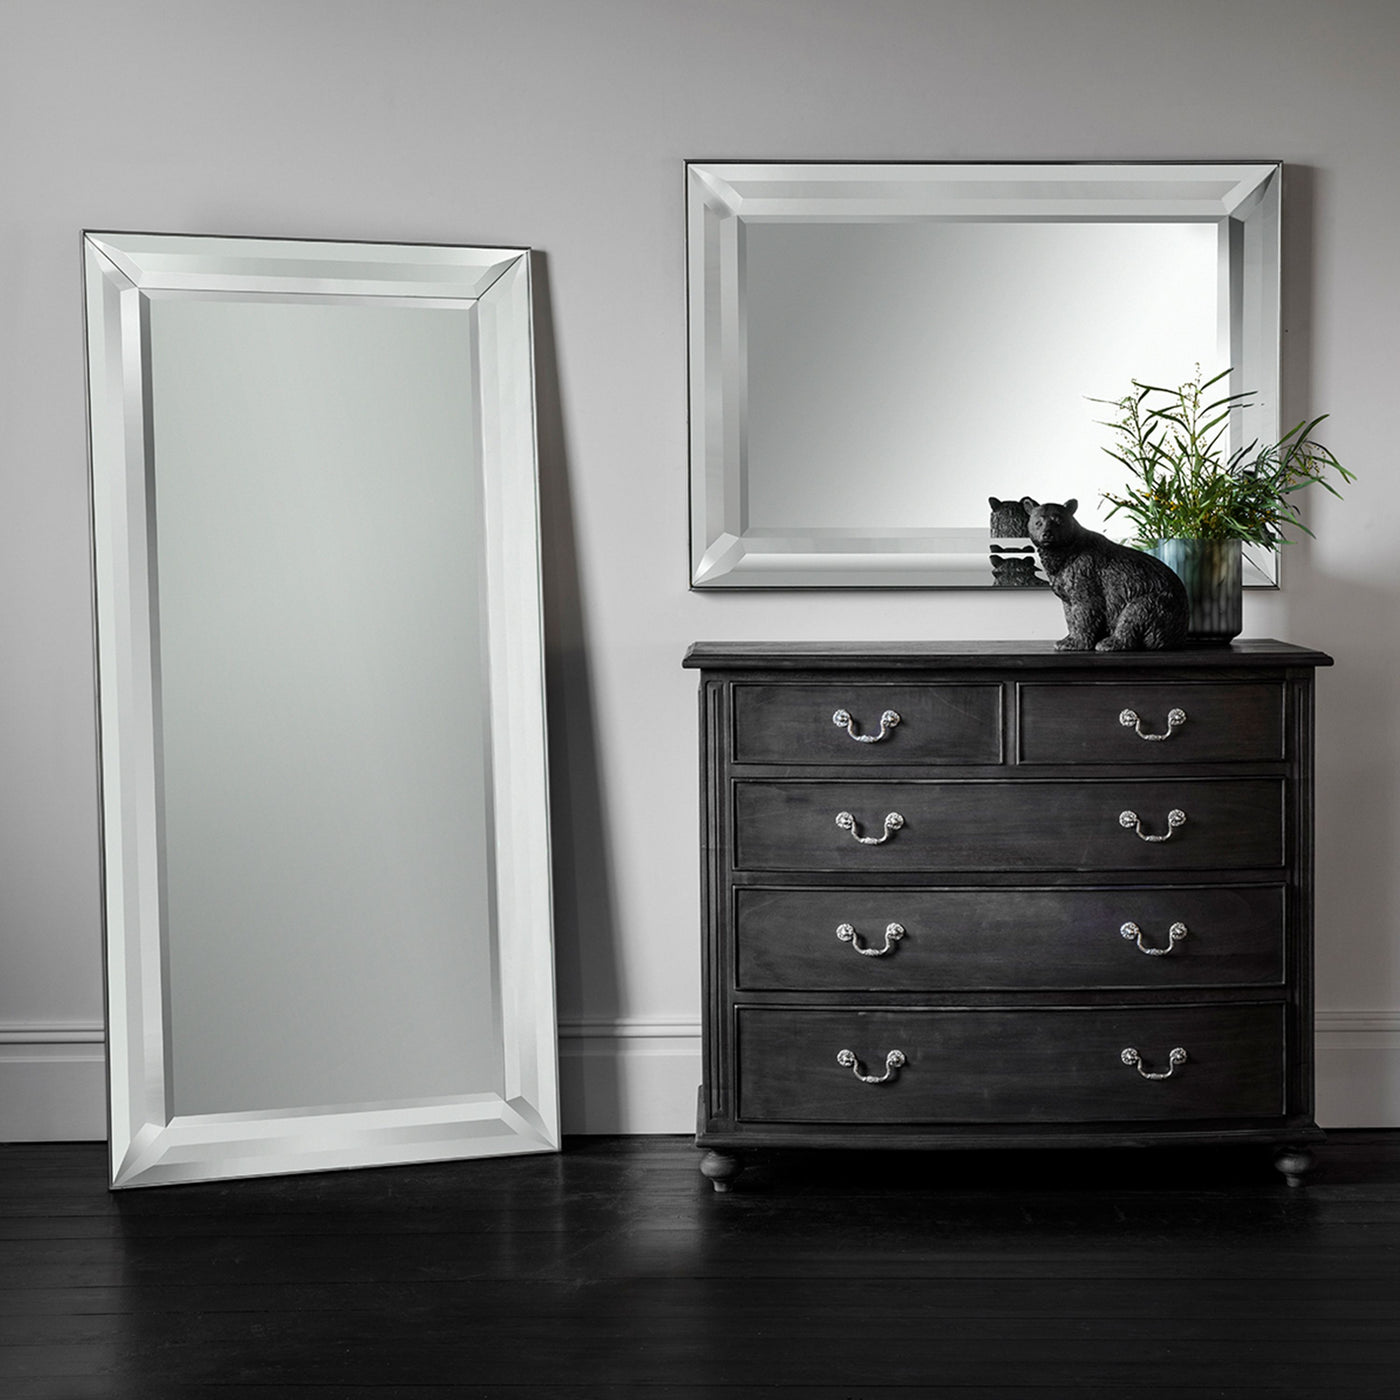 Dovenby Leaner Mirror 65" x 31"